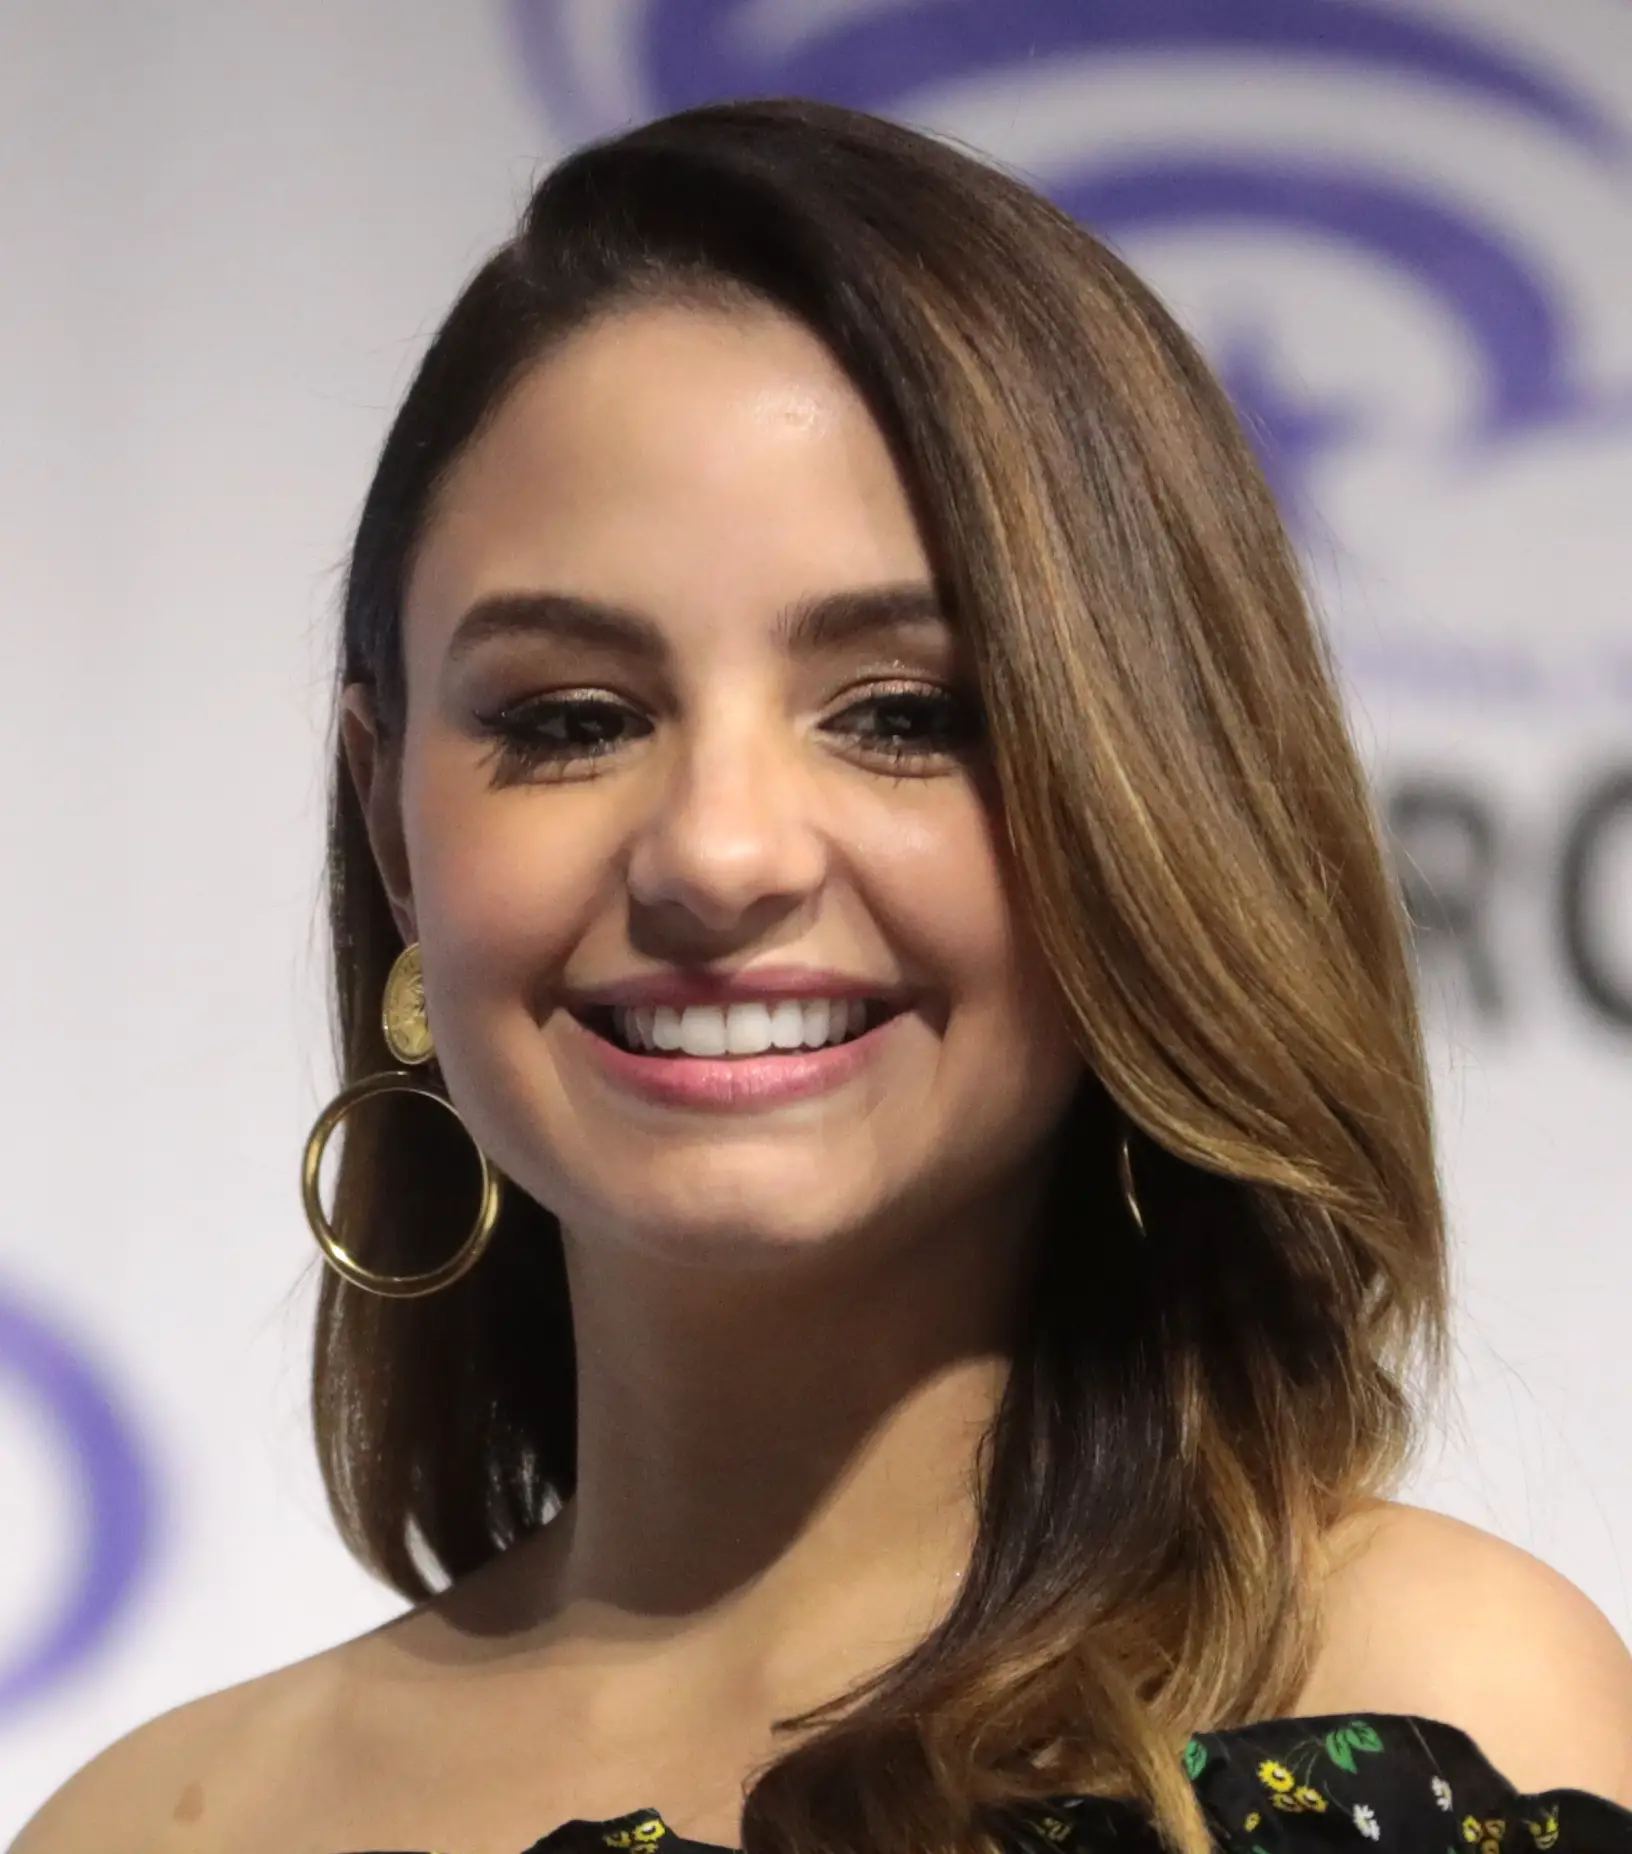 Dating aimee carrero Who is